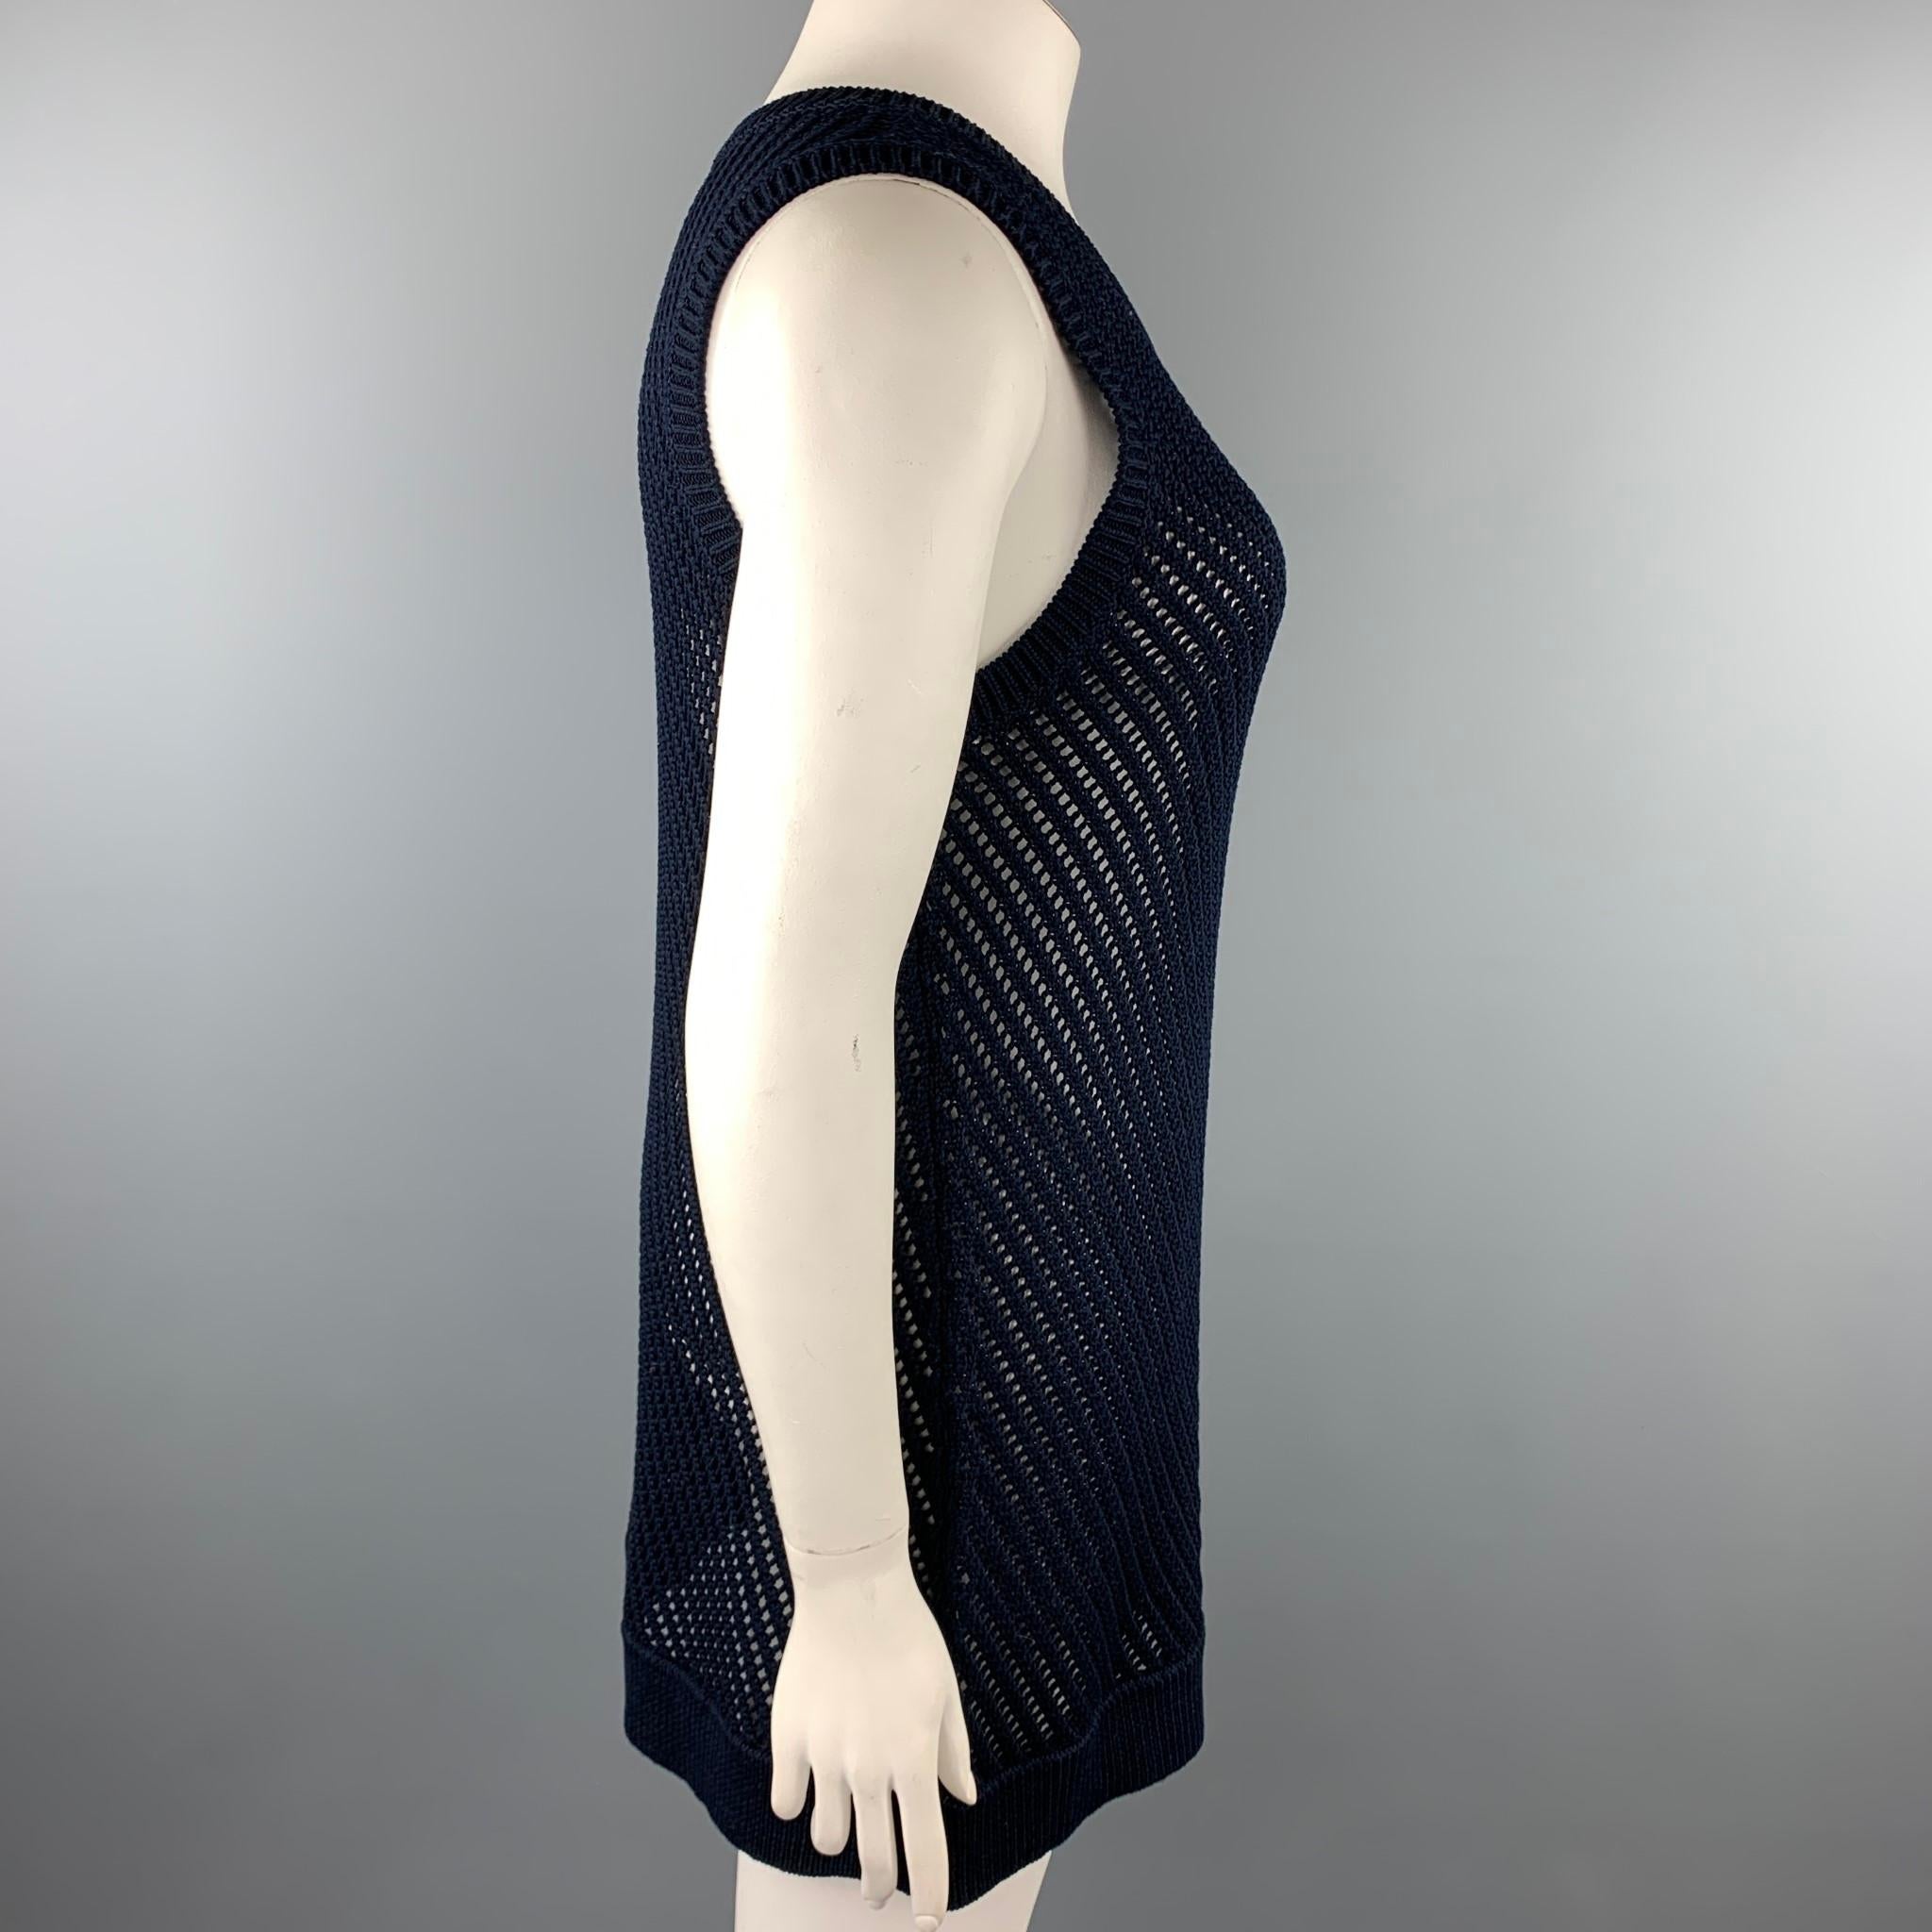 VINCE dress comes in a navy crochet cotton featuring a tunic style, sleeveless, and a crew-neck.

Very Good Pre-Owned Condition.
Marked: L

Measurements:

Shoulder: 14.5 in. 
Bust: 34 in. 
Hip: 38 in. 
Length: 30.5 in. 